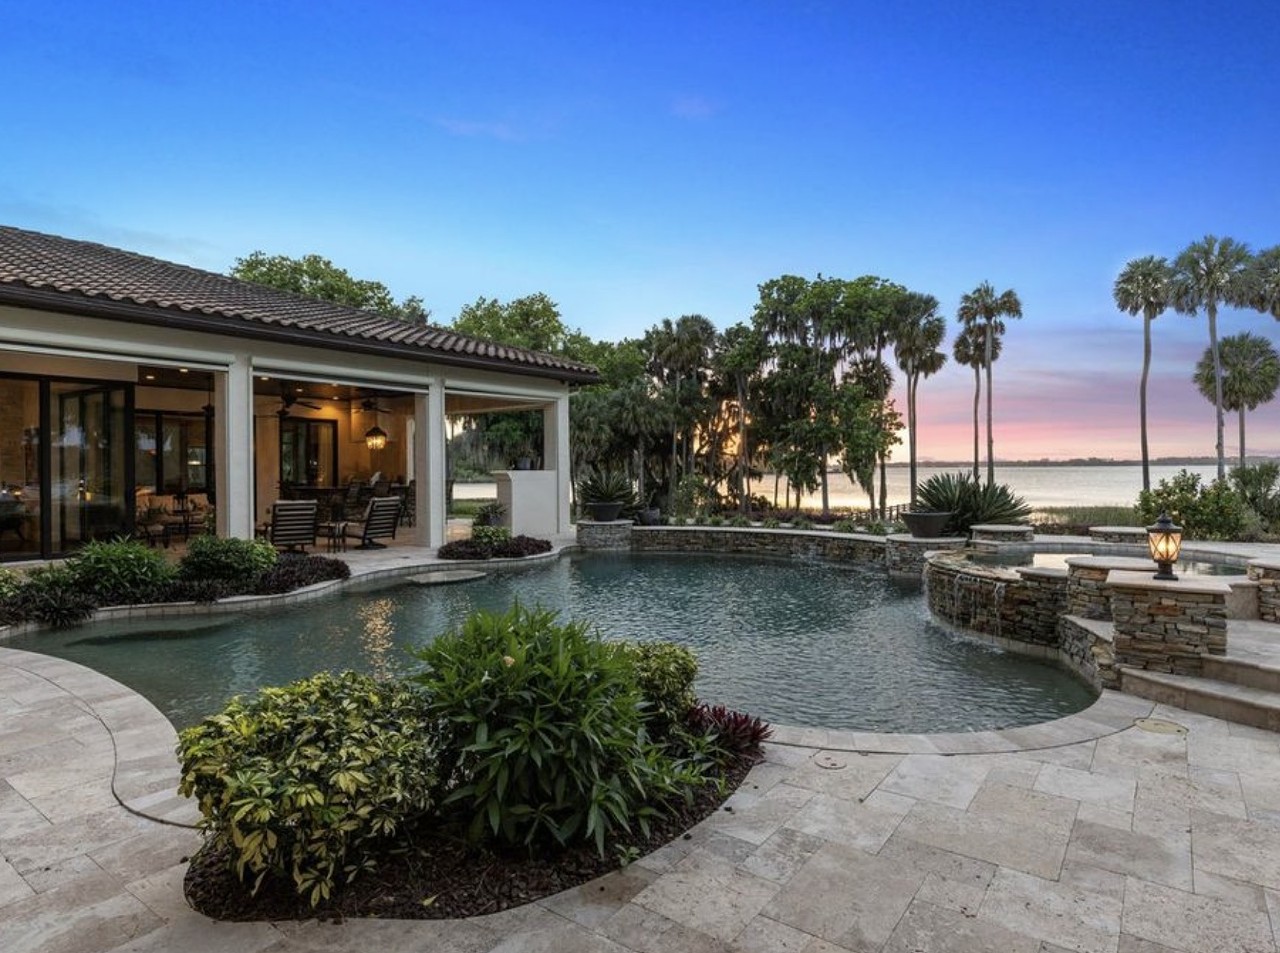 Mount Dora's most expensive home just hit the market for $4.3 million